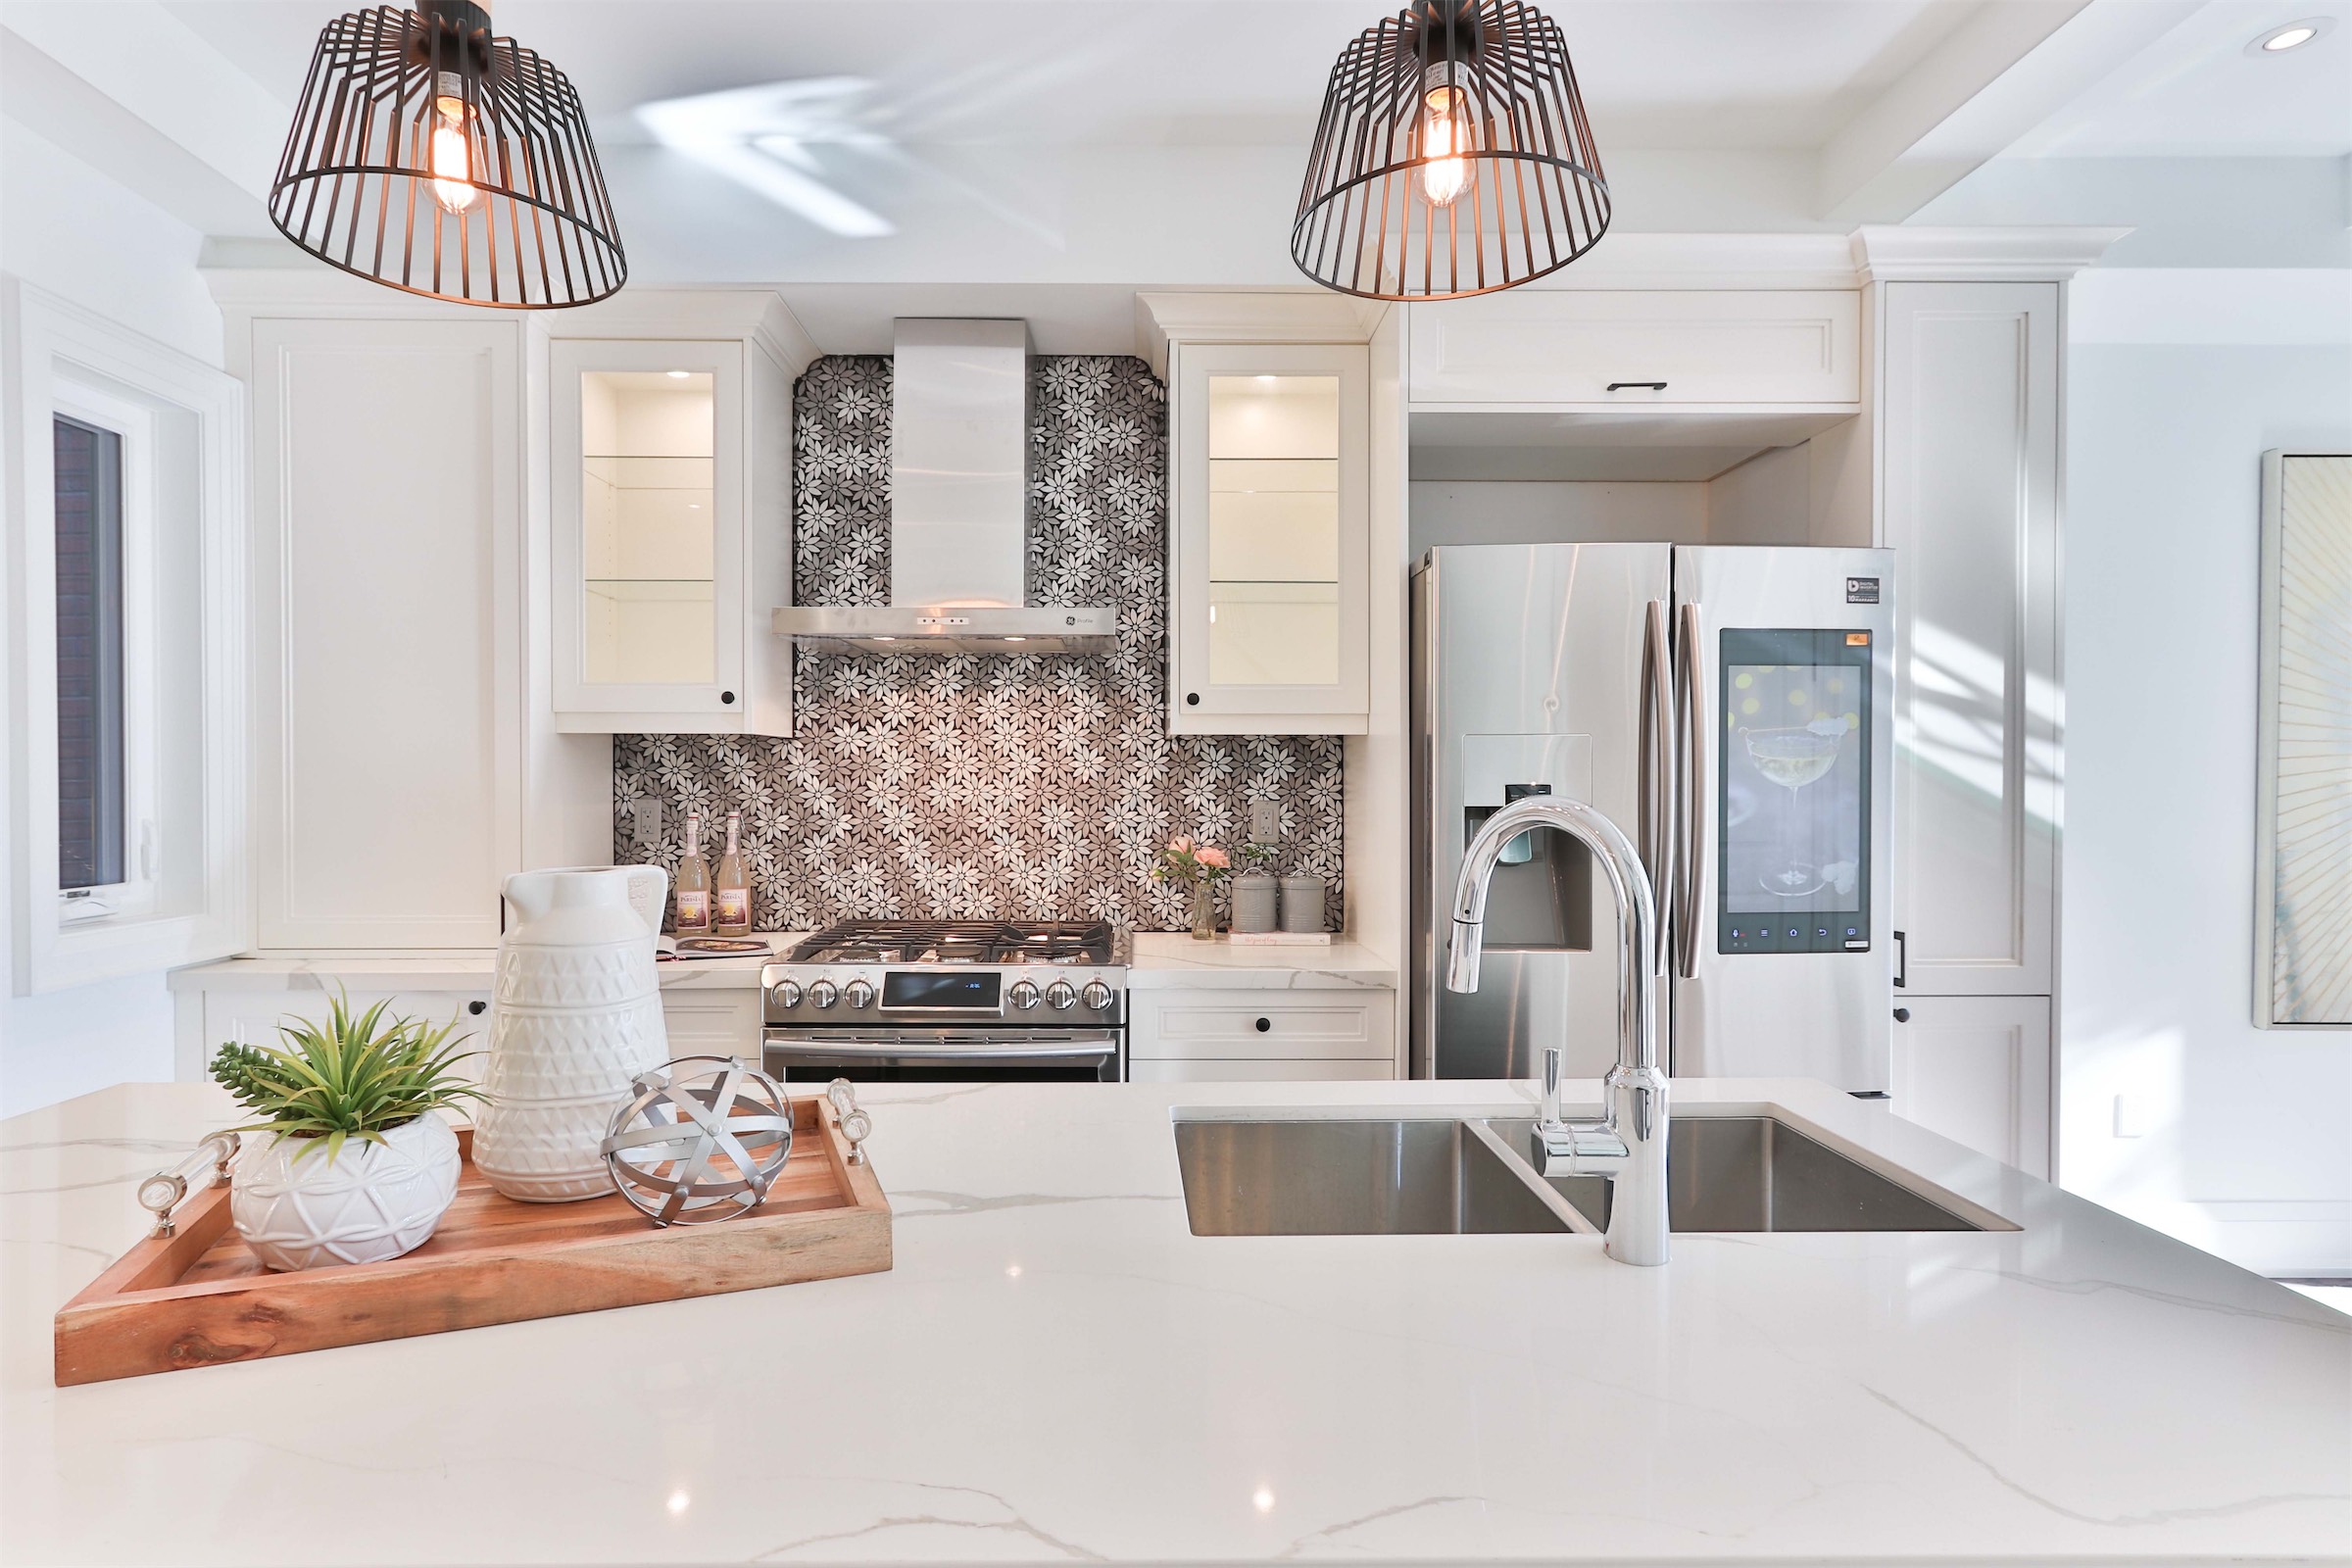 Photo of a kitchen to show what it could look like before you sell your home